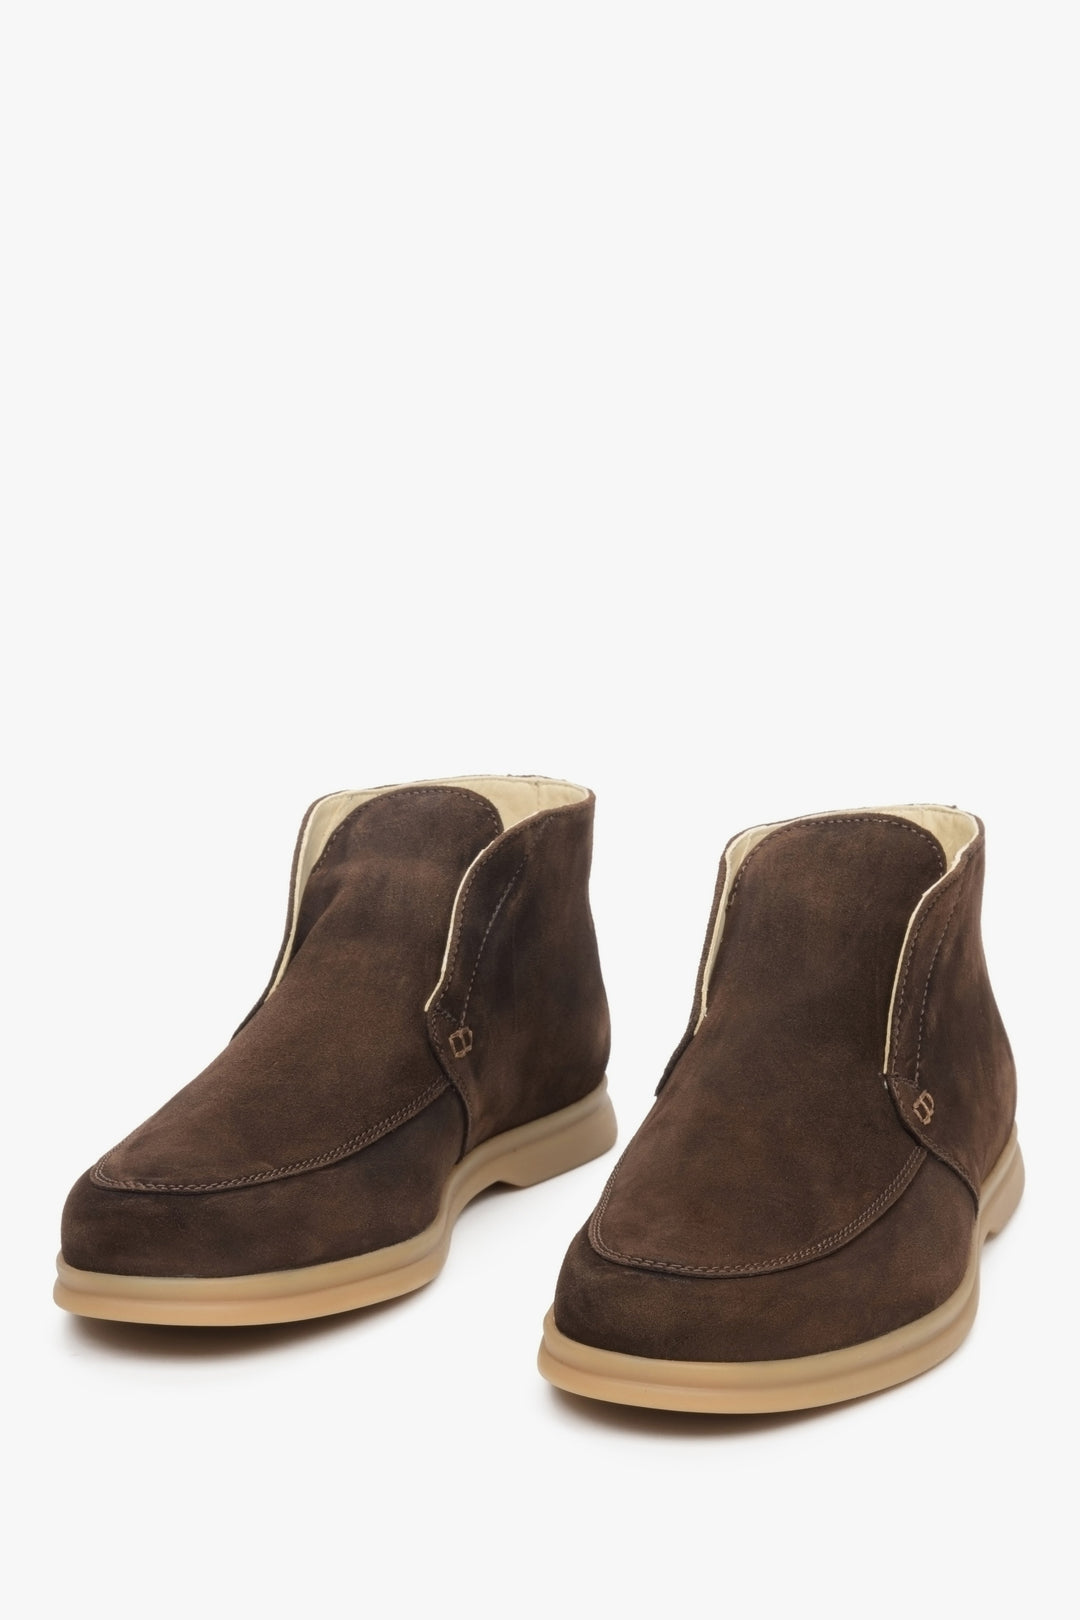 Men's fall brown suede ankle boots - close-up on the front of the Estro footwear.